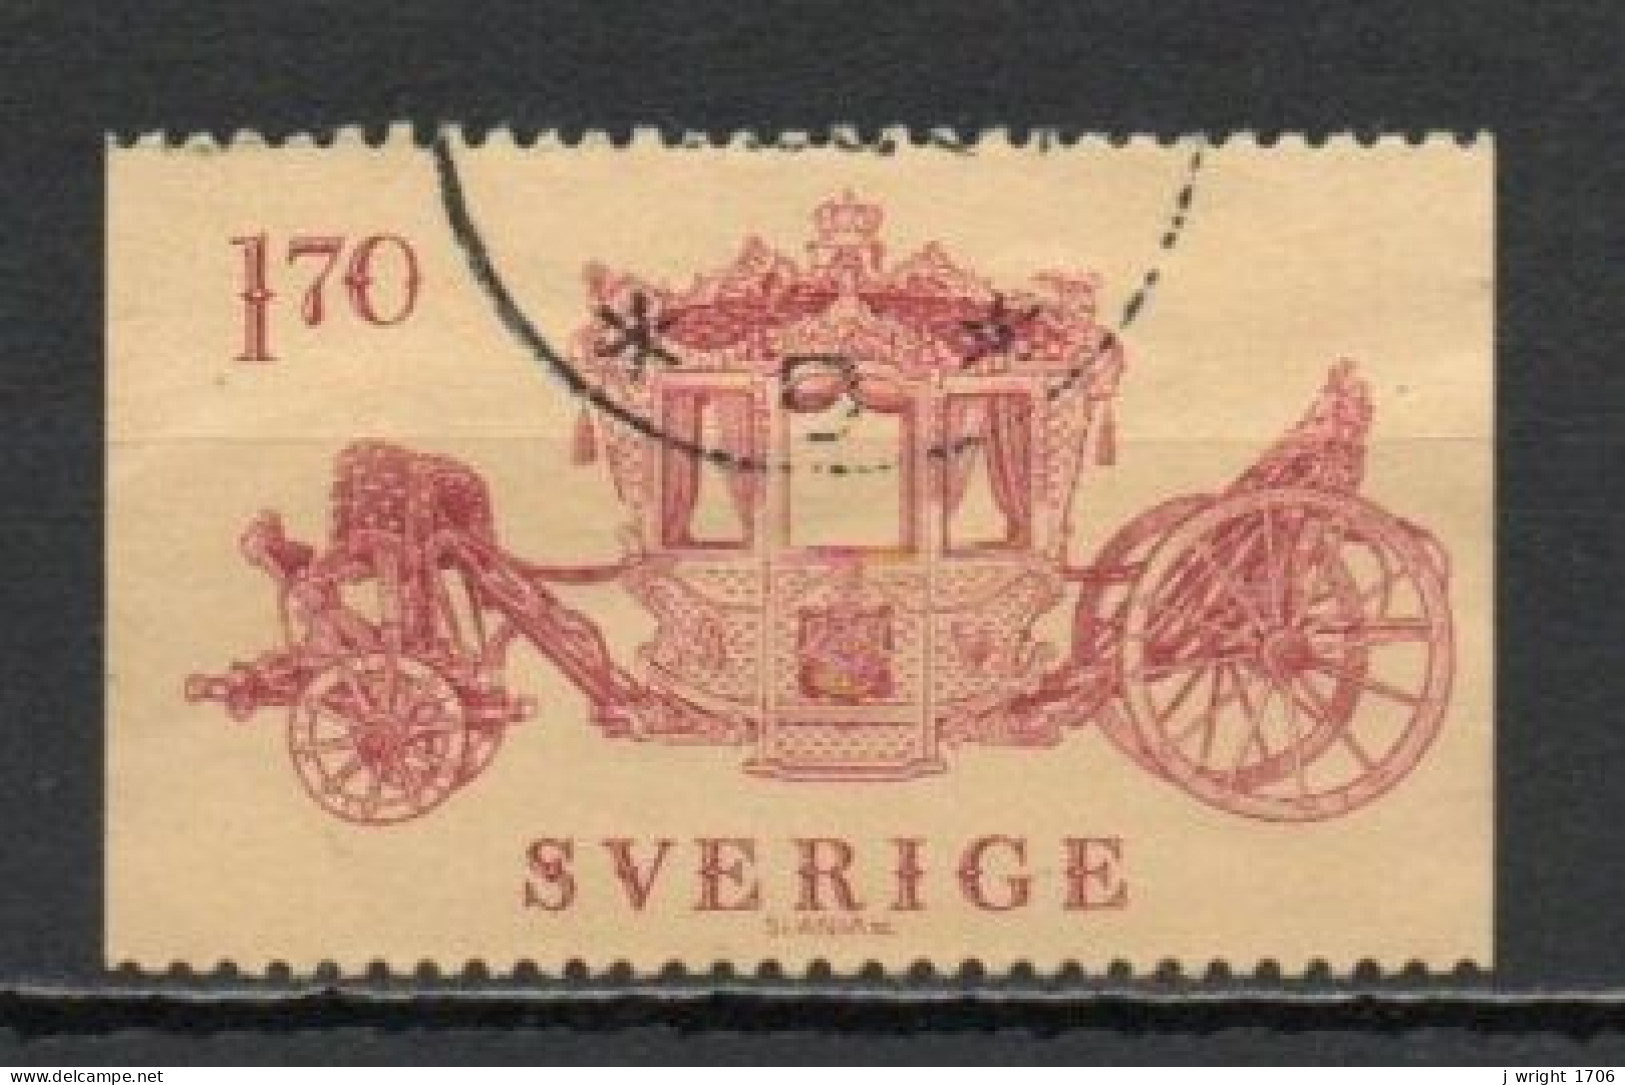 Sweden, 1978, Coronation Coach, 1.70kr, USED - Used Stamps